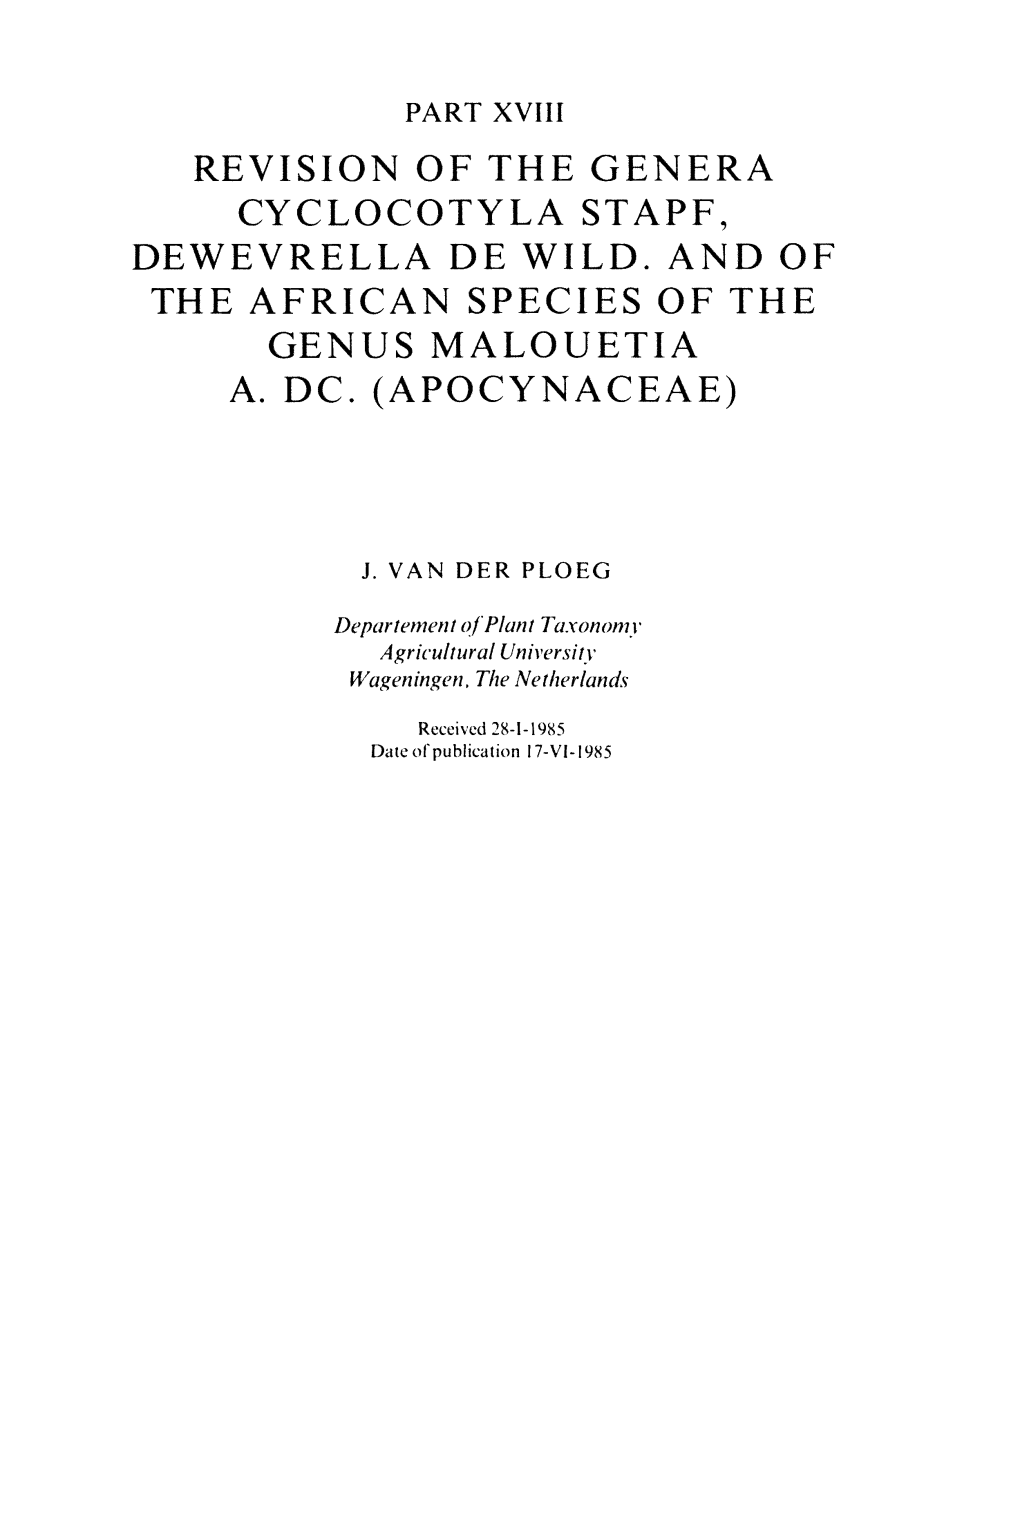 Revision of the Genera Cyclocotyla Stapf, Dewevrella De Wild. and of the African Species of the Genus Malouetia A. Dc